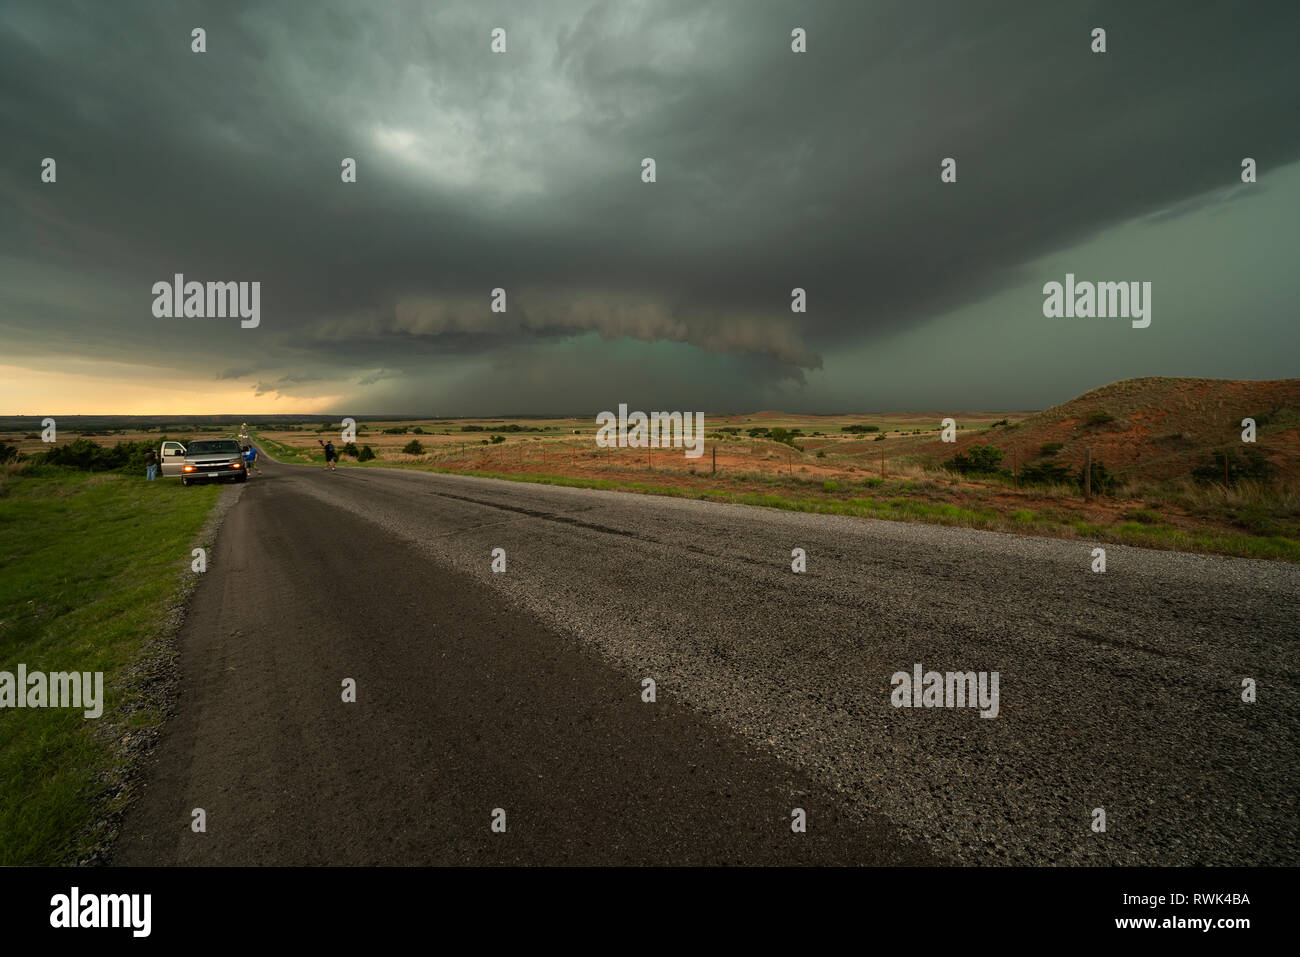 Watching a supercell thunderstorm while on a tornado chasing tour; Oklahoma, United States of America Stock Photo